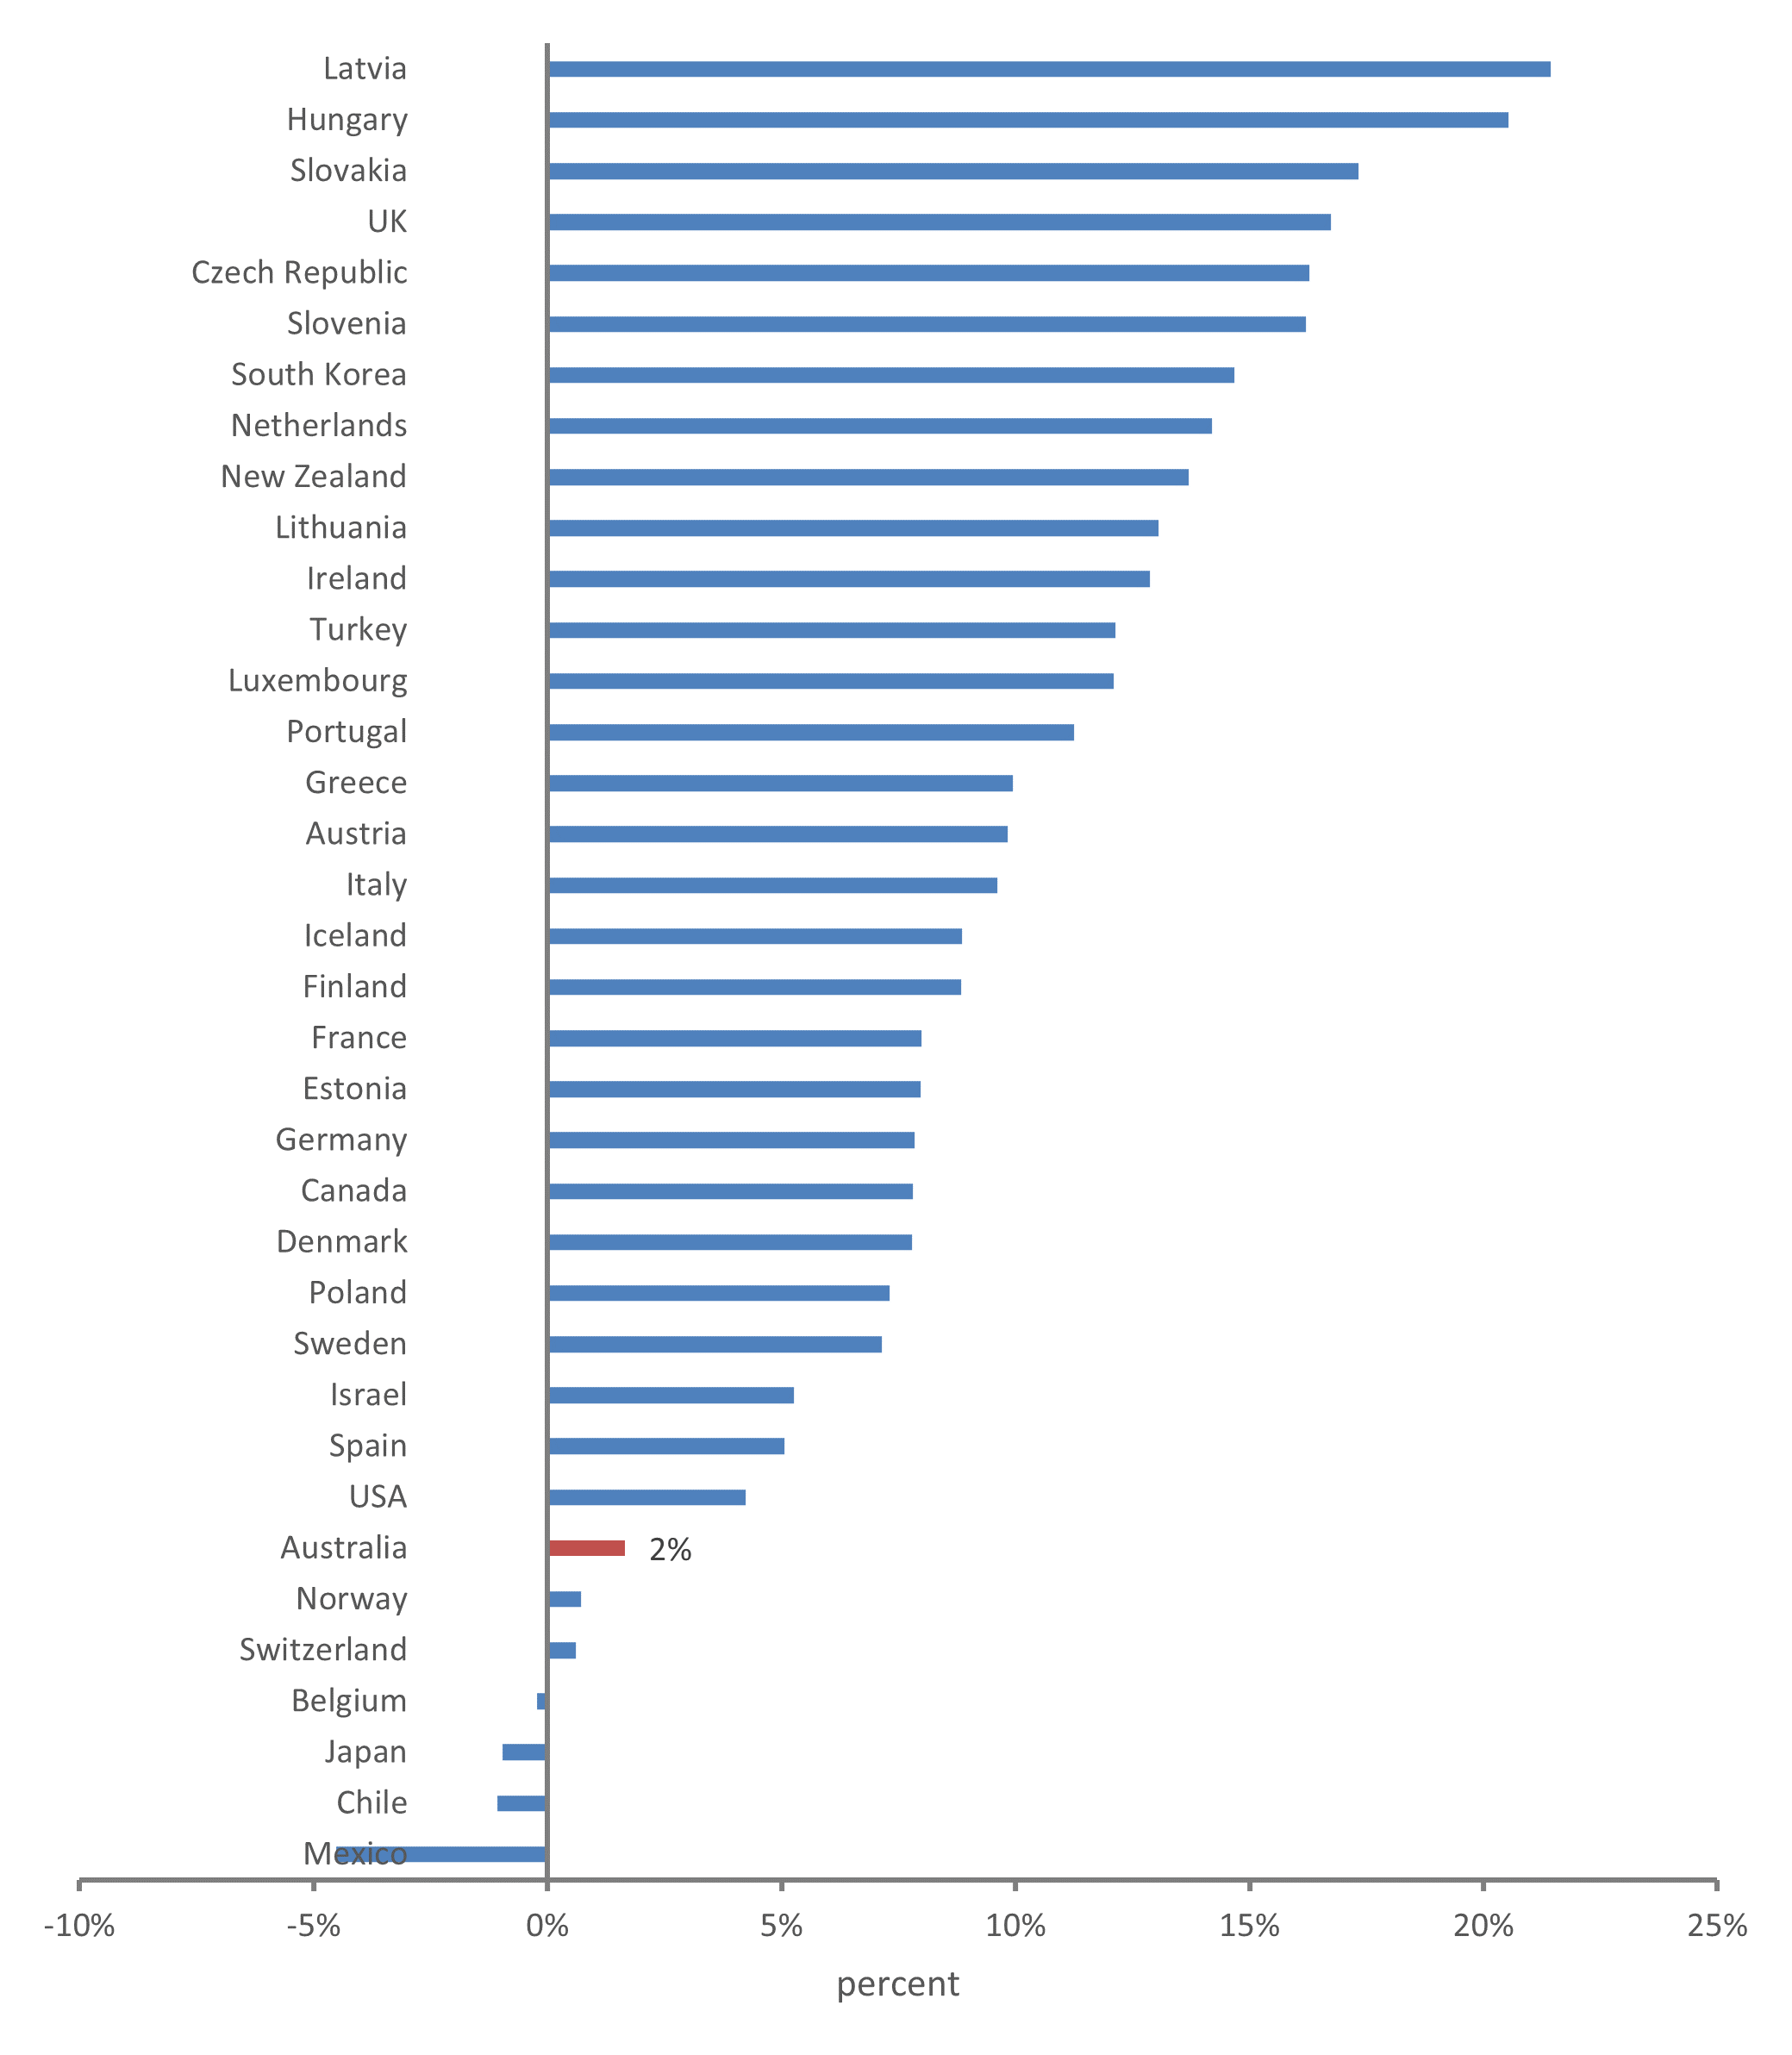 This bar chart shows health spending compared to forecasted trend in terms of purchasing power parities of OECD countries from 2020 to 2022. Australia’s health spending was 2% higher than forecasted trend of ten years before the pandemic years. The highest difference between actual and forecasted spending was for Latvia, while Mexico, Chile, Japan and Belgium showed a decrease in actual vs forecasted trend during the pandemic. 